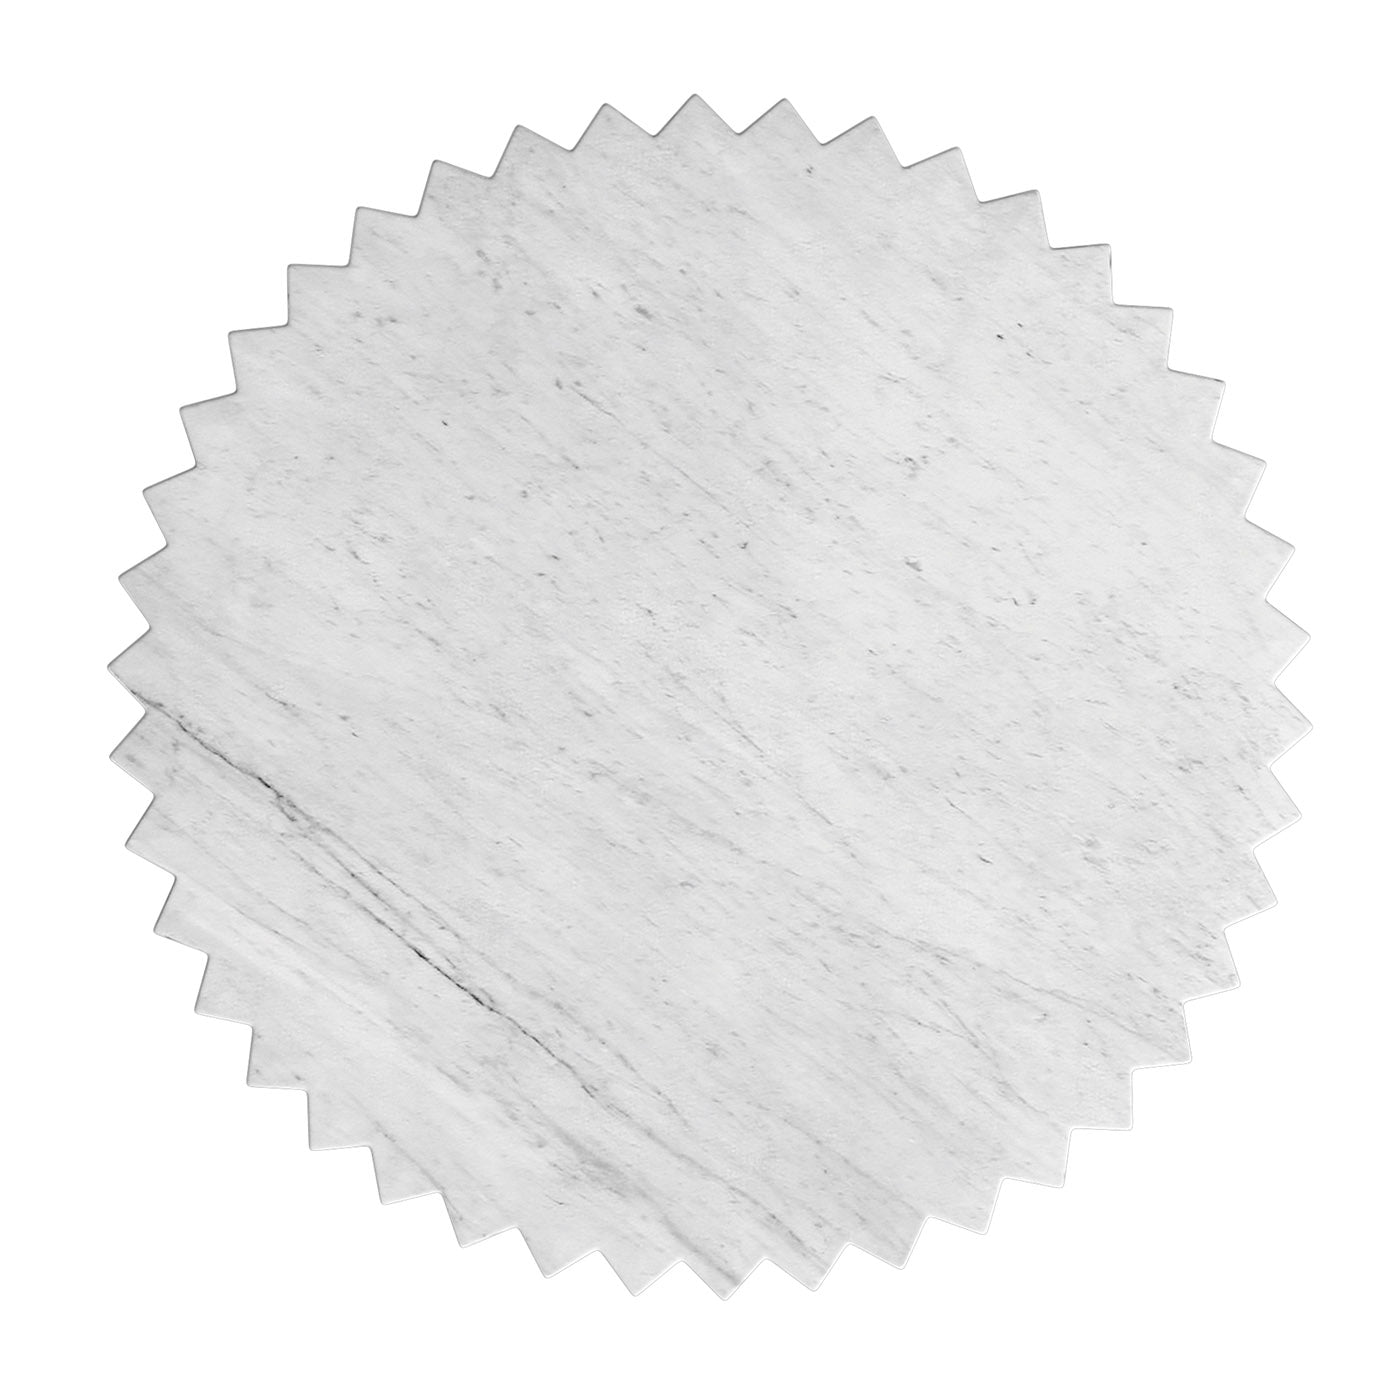 Doris Multifaceted In White Carrara Marble Coffee Table  - Alternative view 2